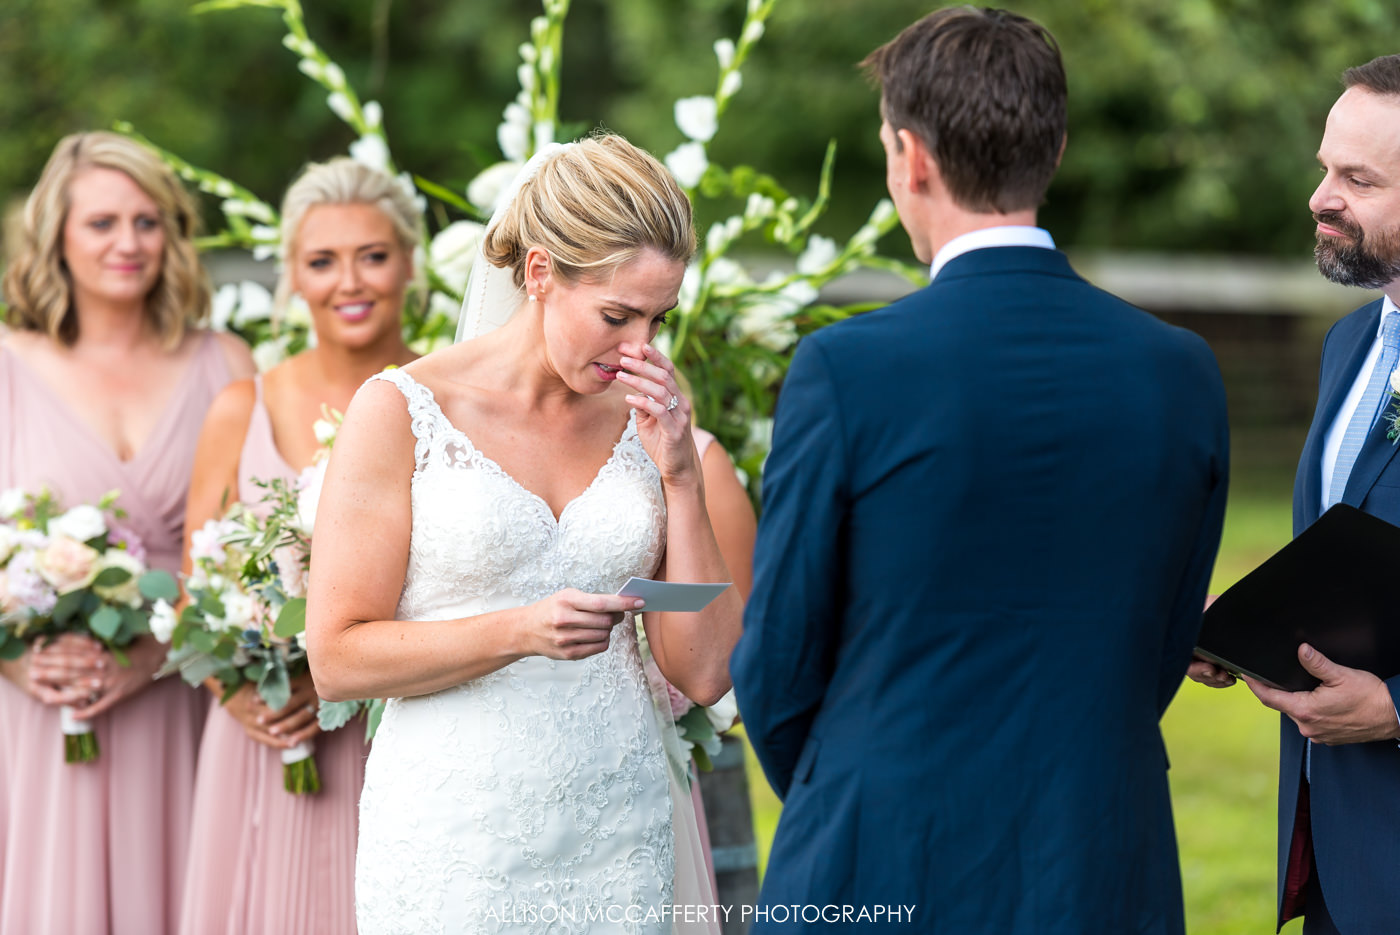 Outdoor wedding ceremony at Rose Bank Winery